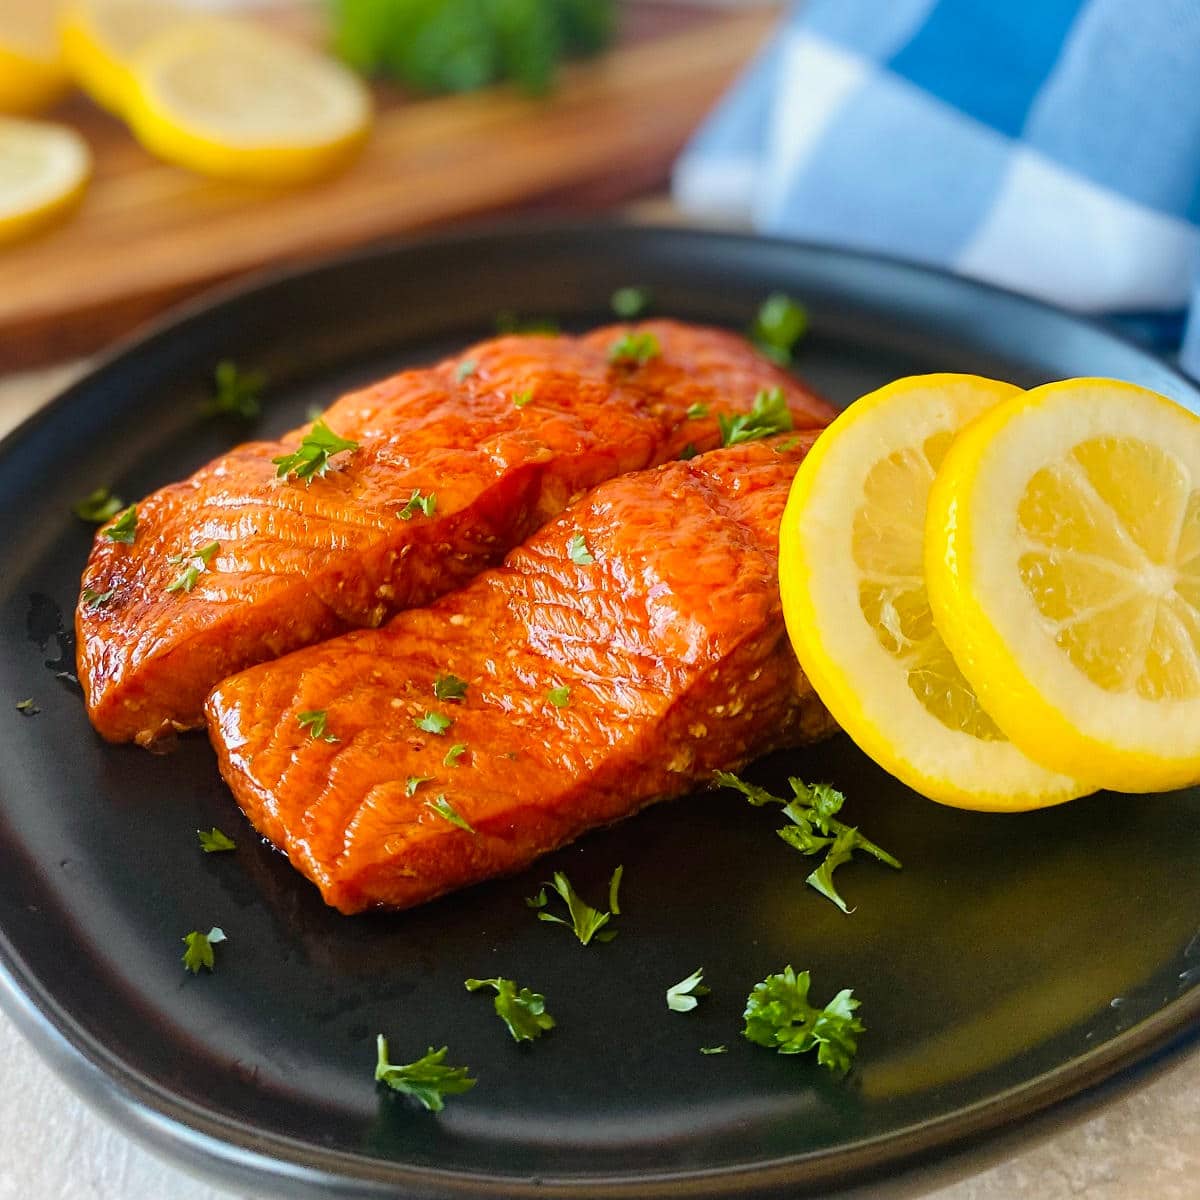 smoked salmon on a plate with sliced lemons and parsley garnish.